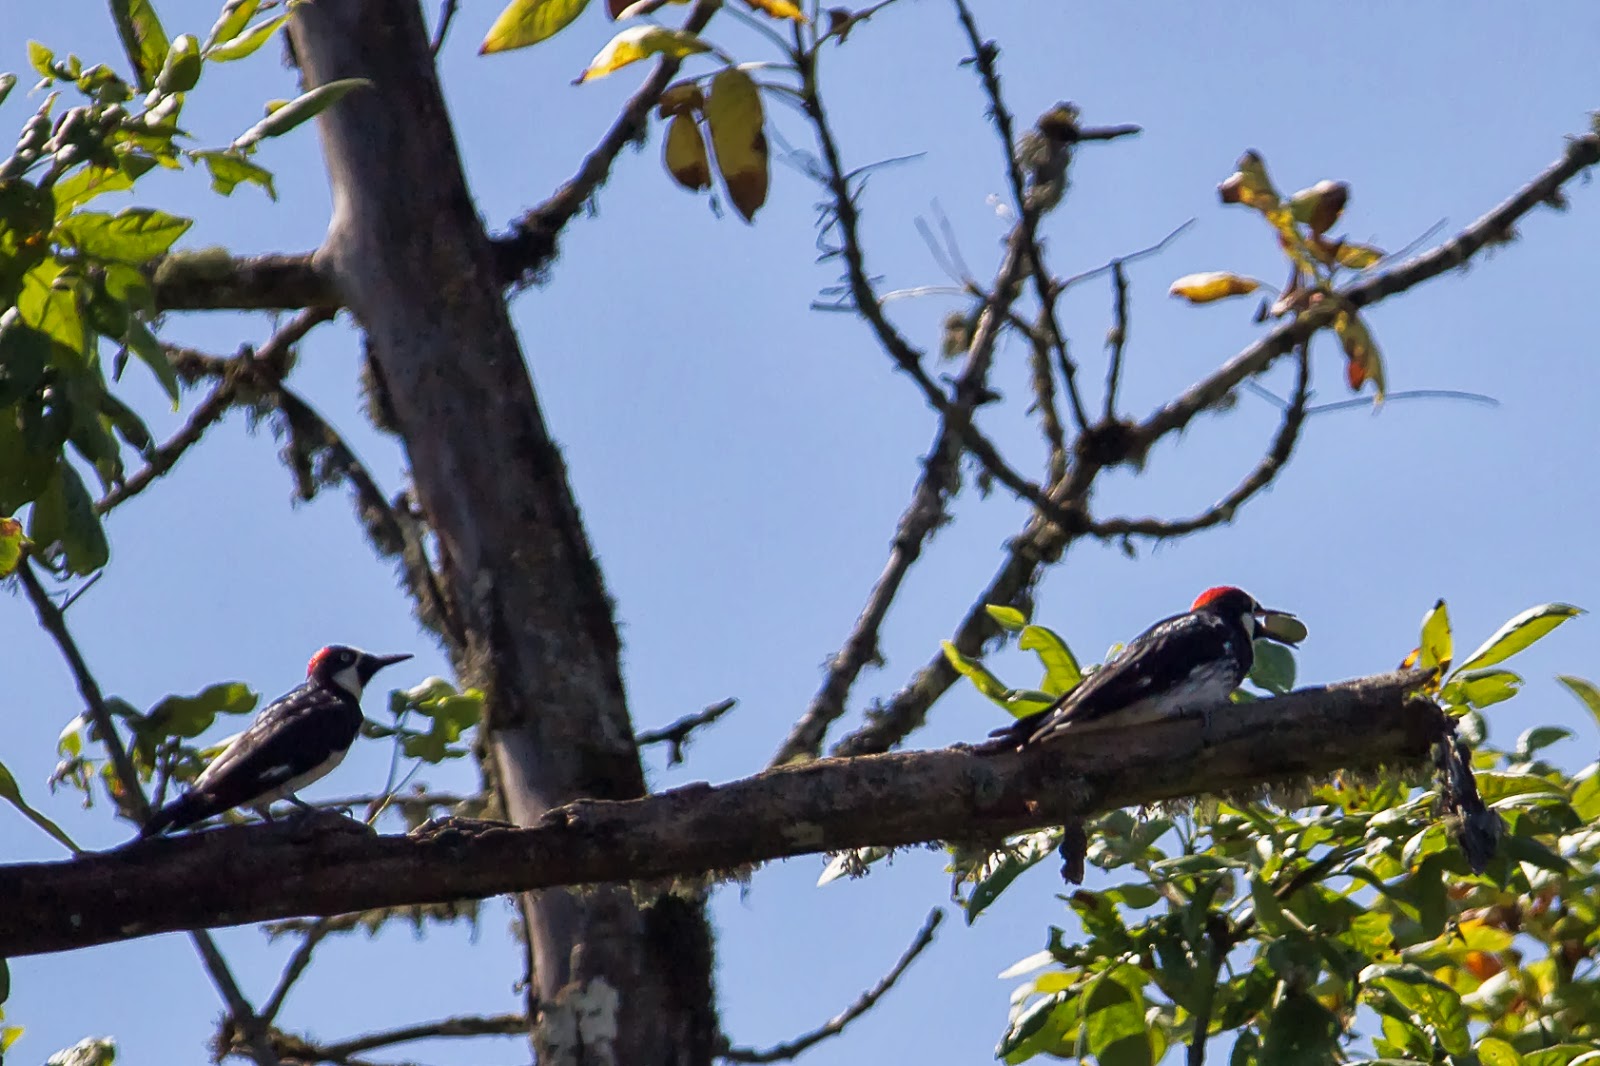 Sonya and Sugata: Abode of the Acorn Woodpecker: to be chopped down as ...